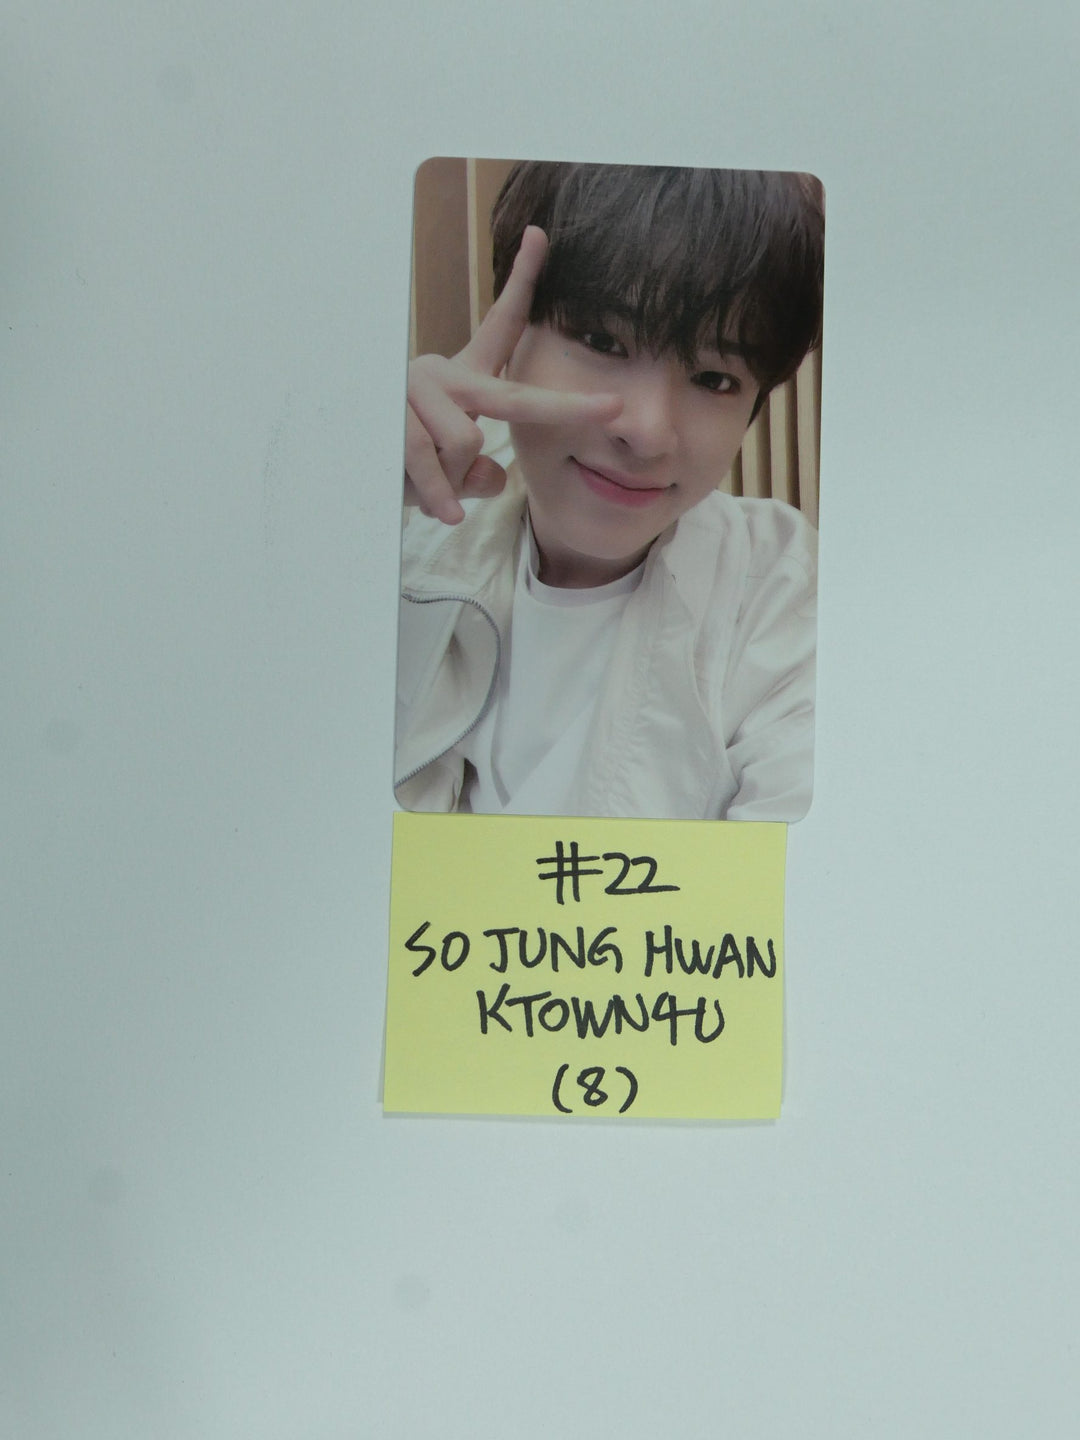 Treasure 'THE SECOND STEP : CHAPTER ONE' - Ktown4U Luckydraw Event PVC Photocard